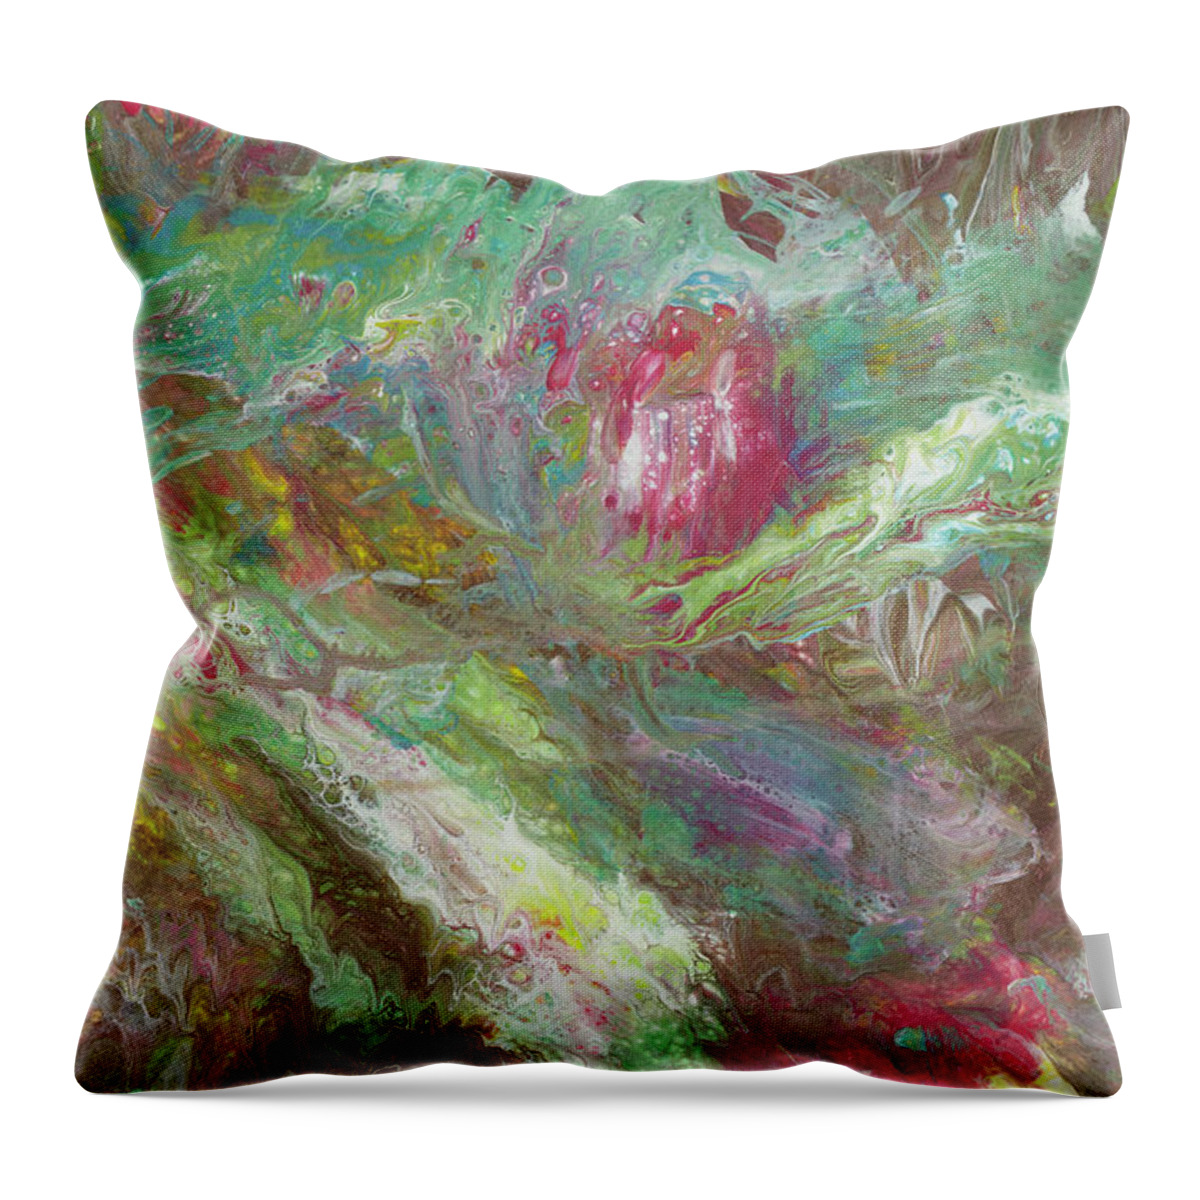 Water And Earth Throw Pillow featuring the painting Rosewater by Tessa Evette